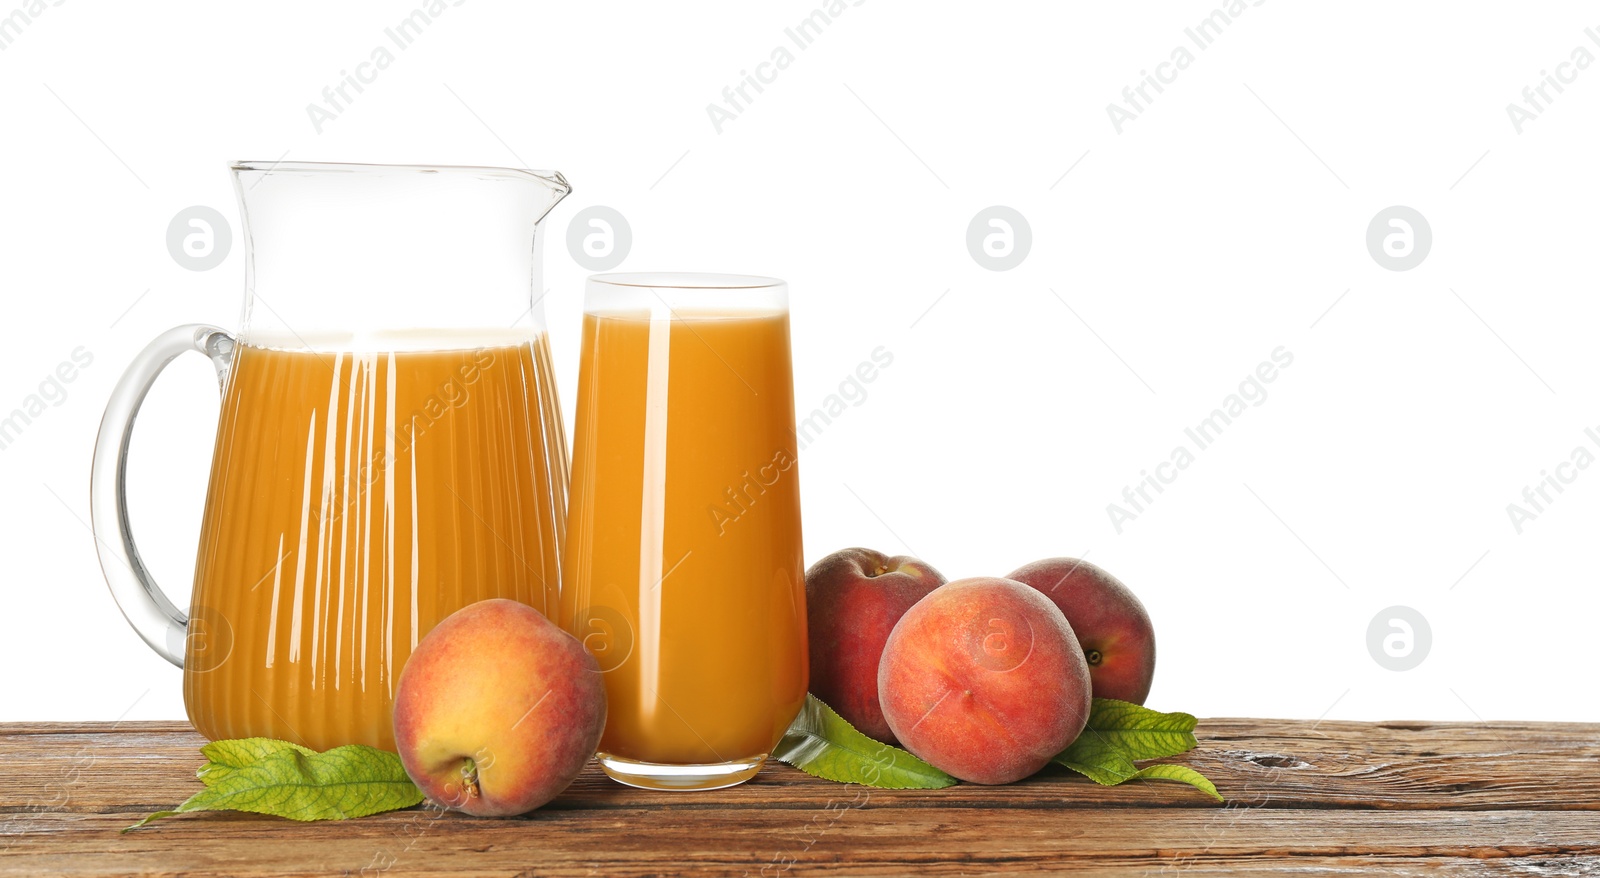 Photo of Natural freshly made peach juice on wooden table, white background